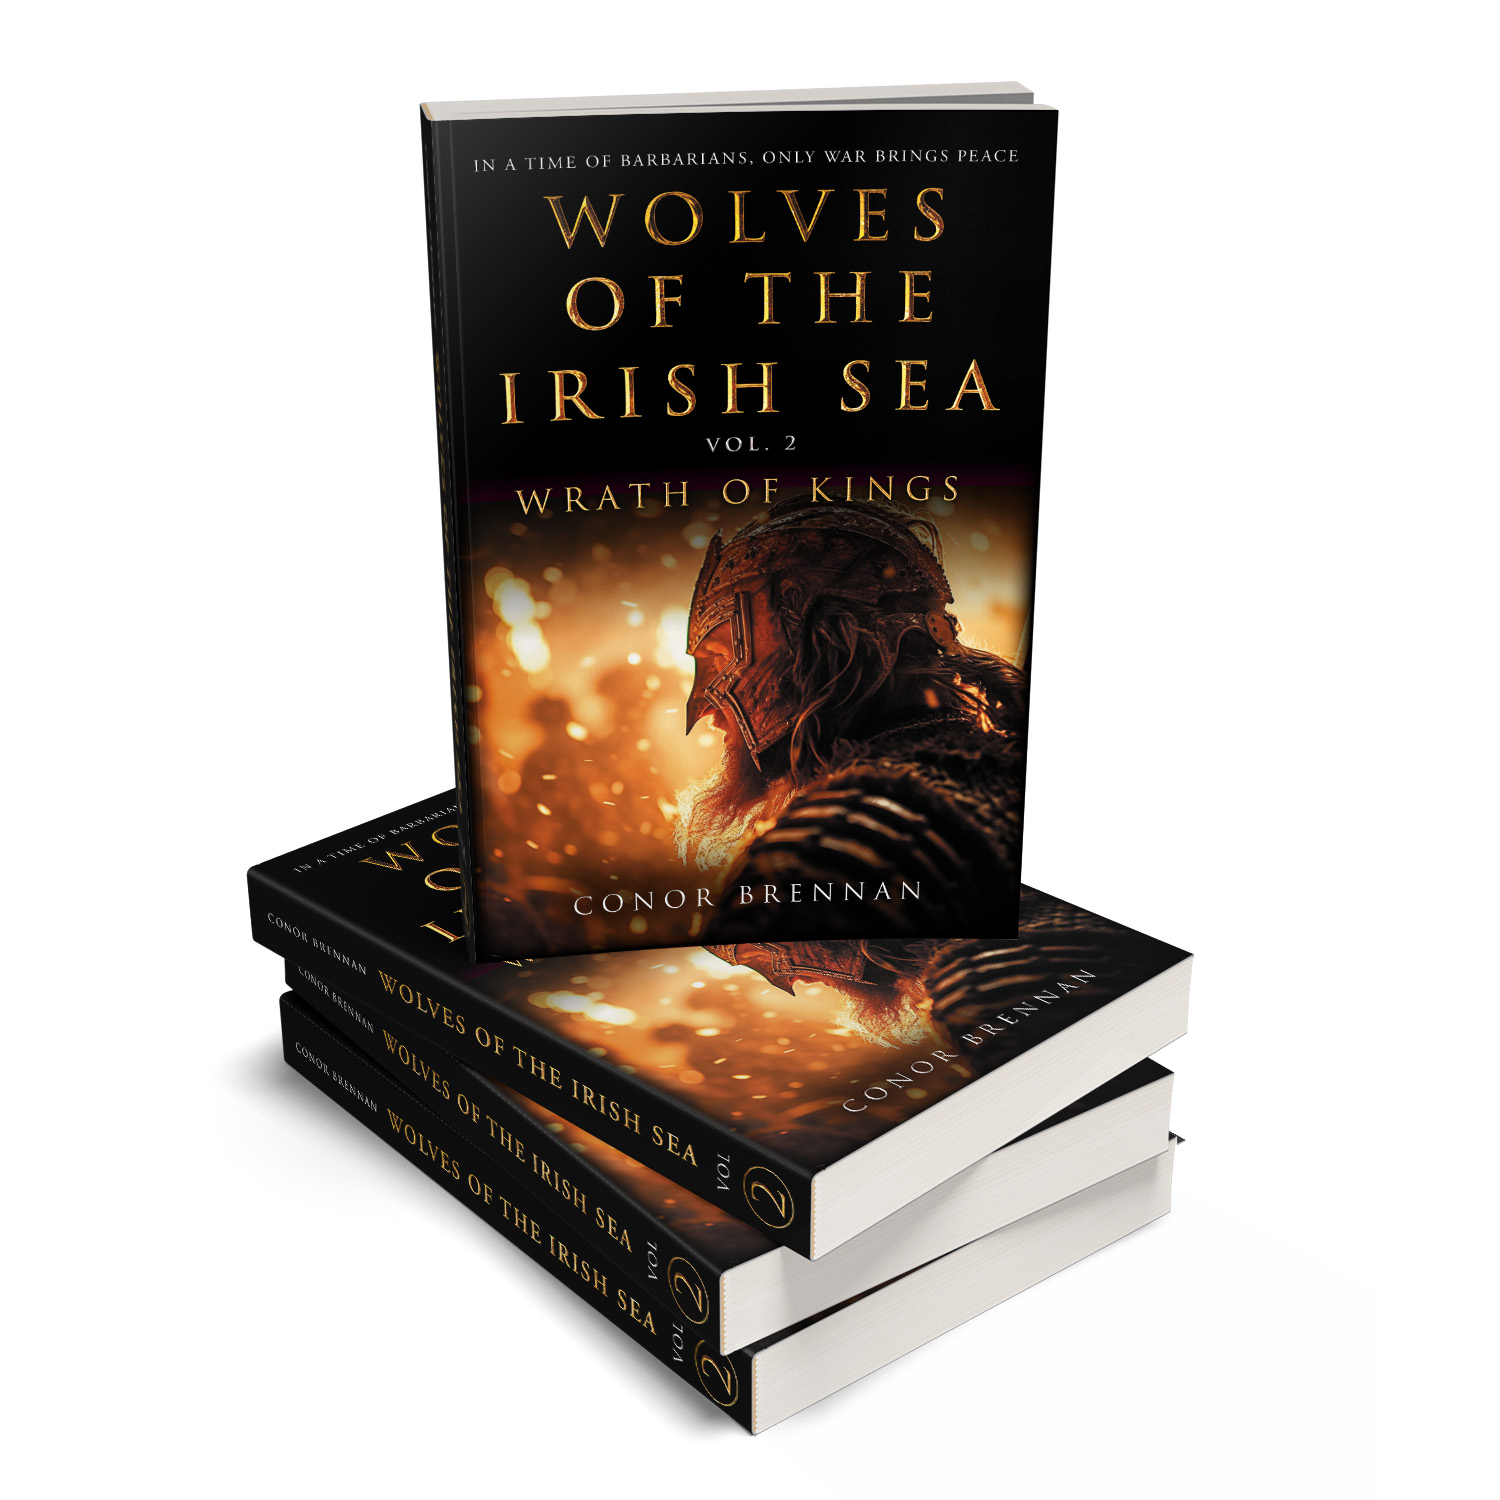 'Wolves of the Irish Sea' is a dark and epic historical fiction series. The author is Conor Brennan. The book cover and interior design are by Mark Thomas. To learn more about what Mark could do for your book, please visit coverness.com.